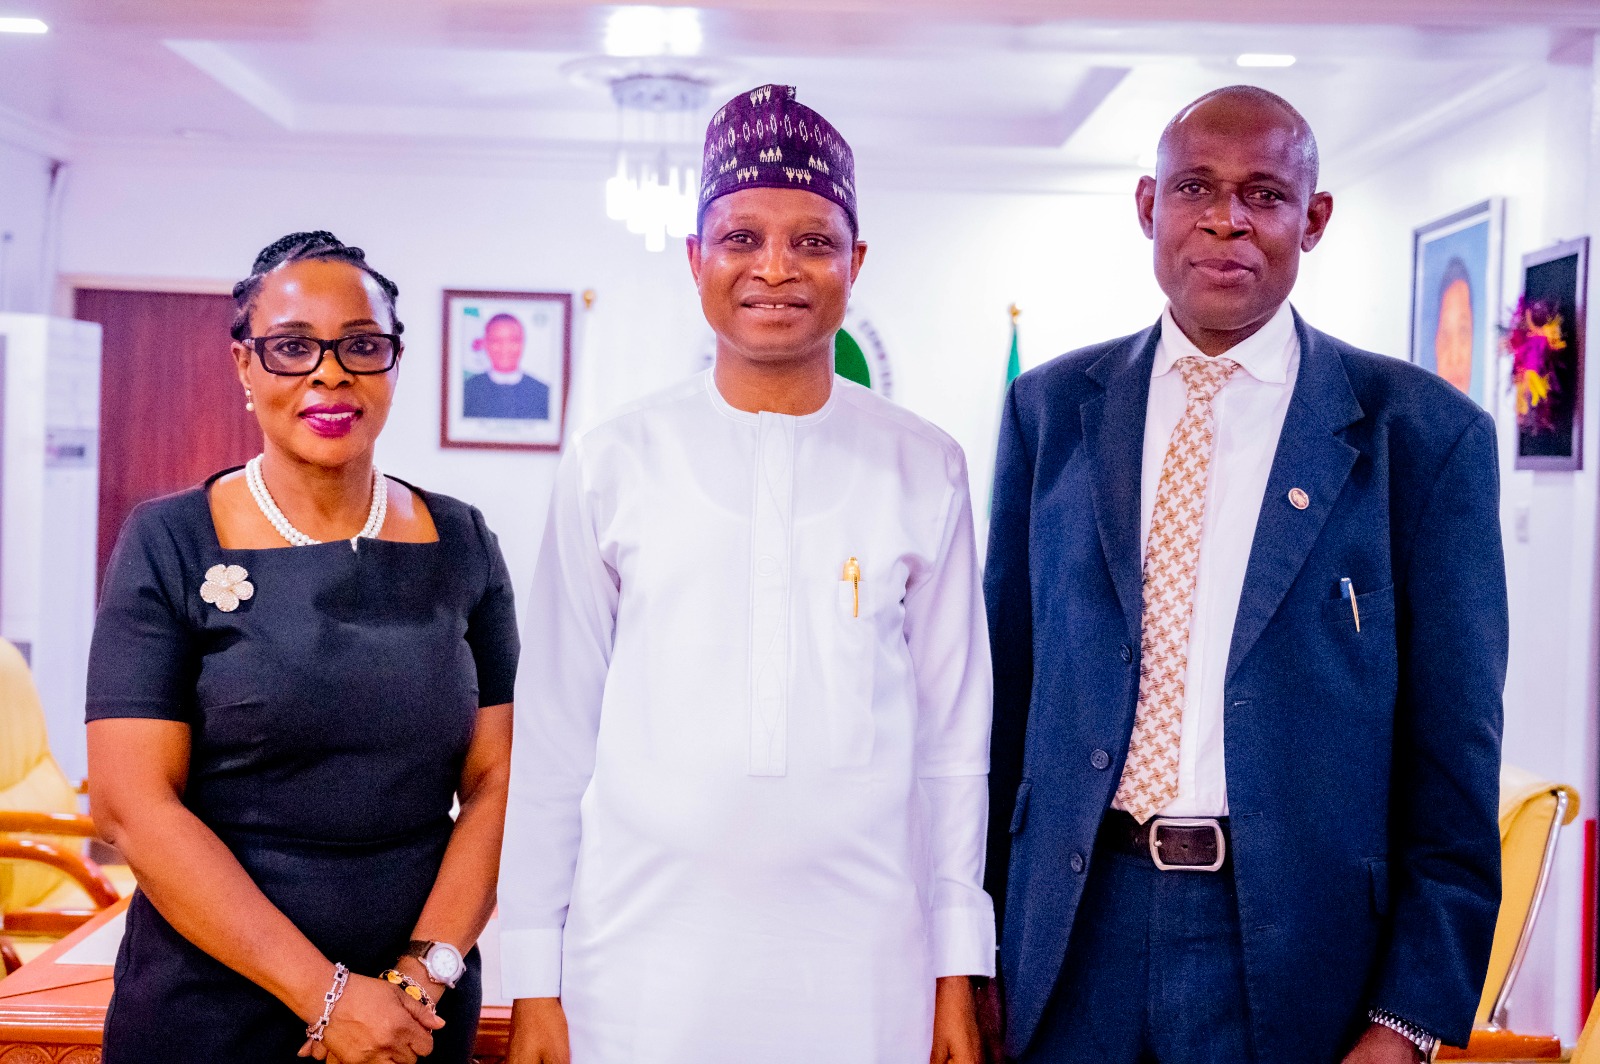 NCPC to Partner With National Association of Catholic Lawyers